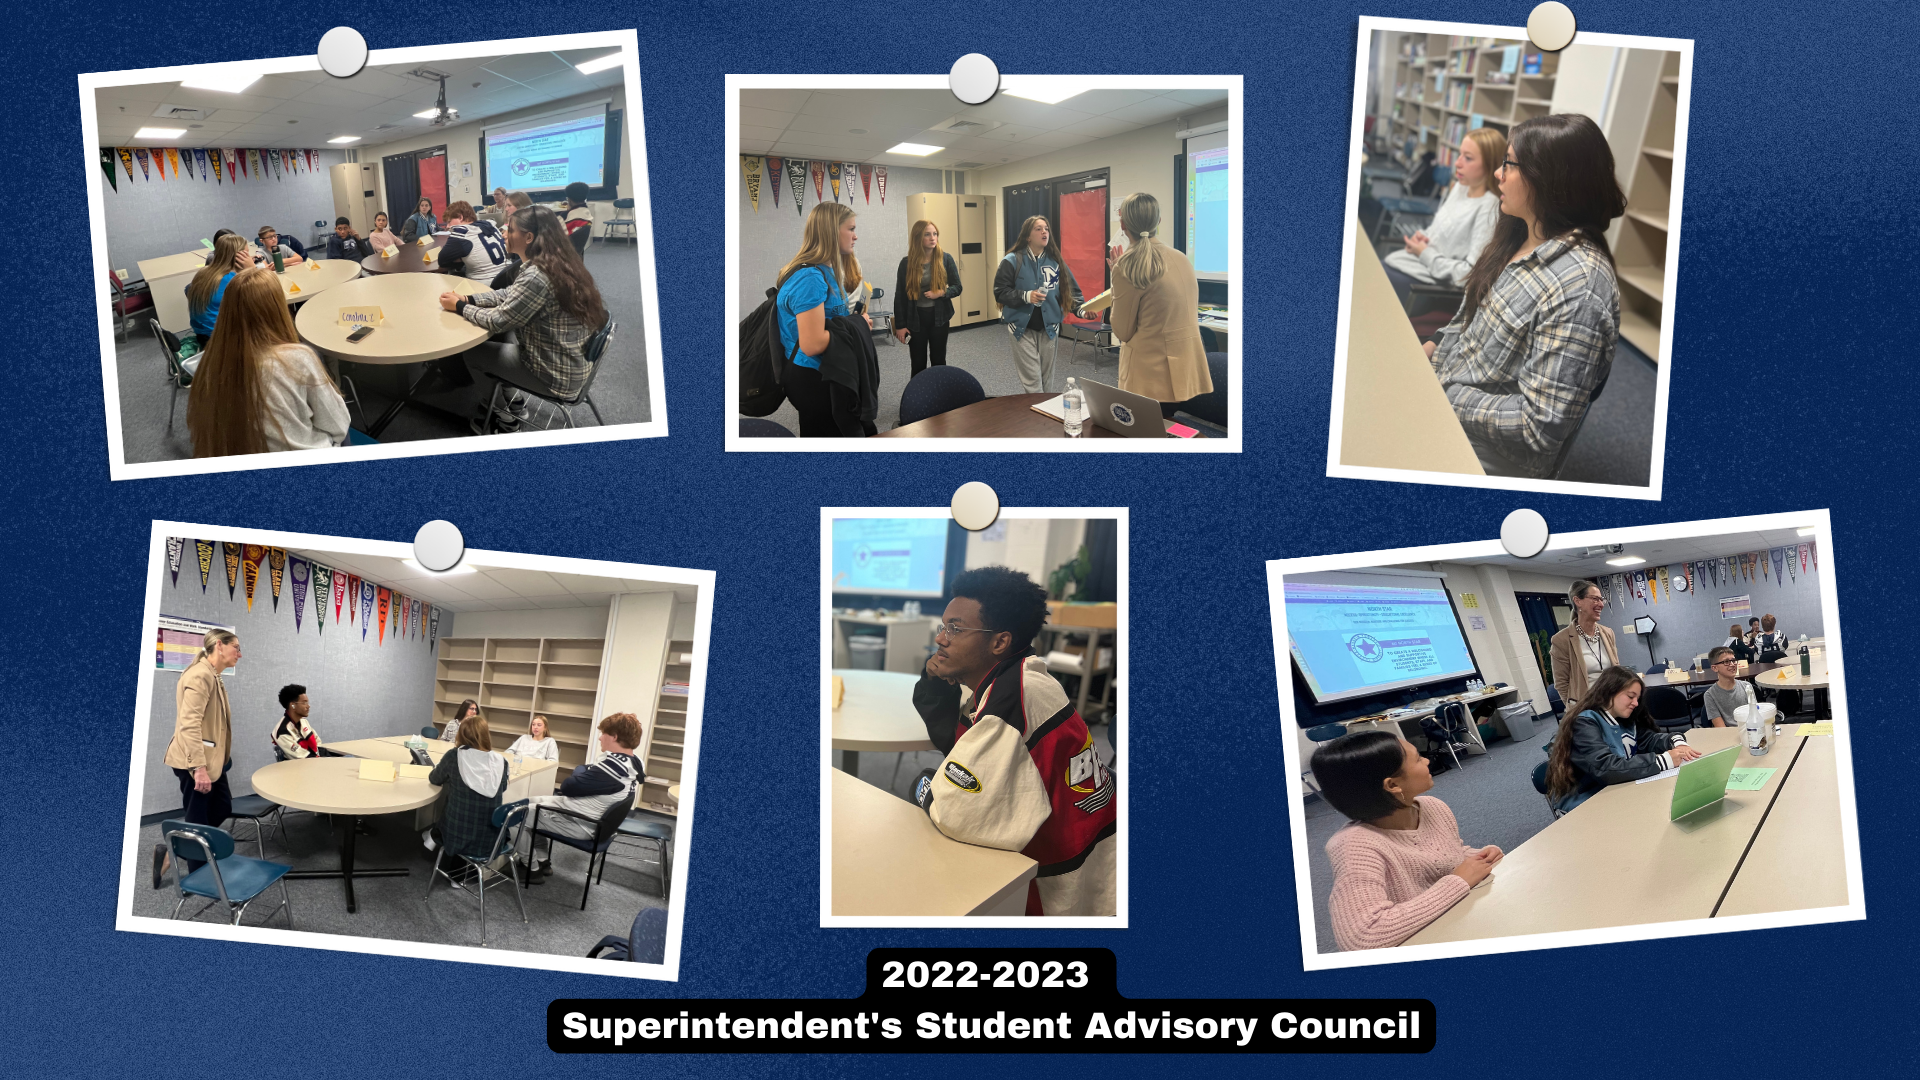 Photo of a collage of images of the Superintendent's Student Advisory Council